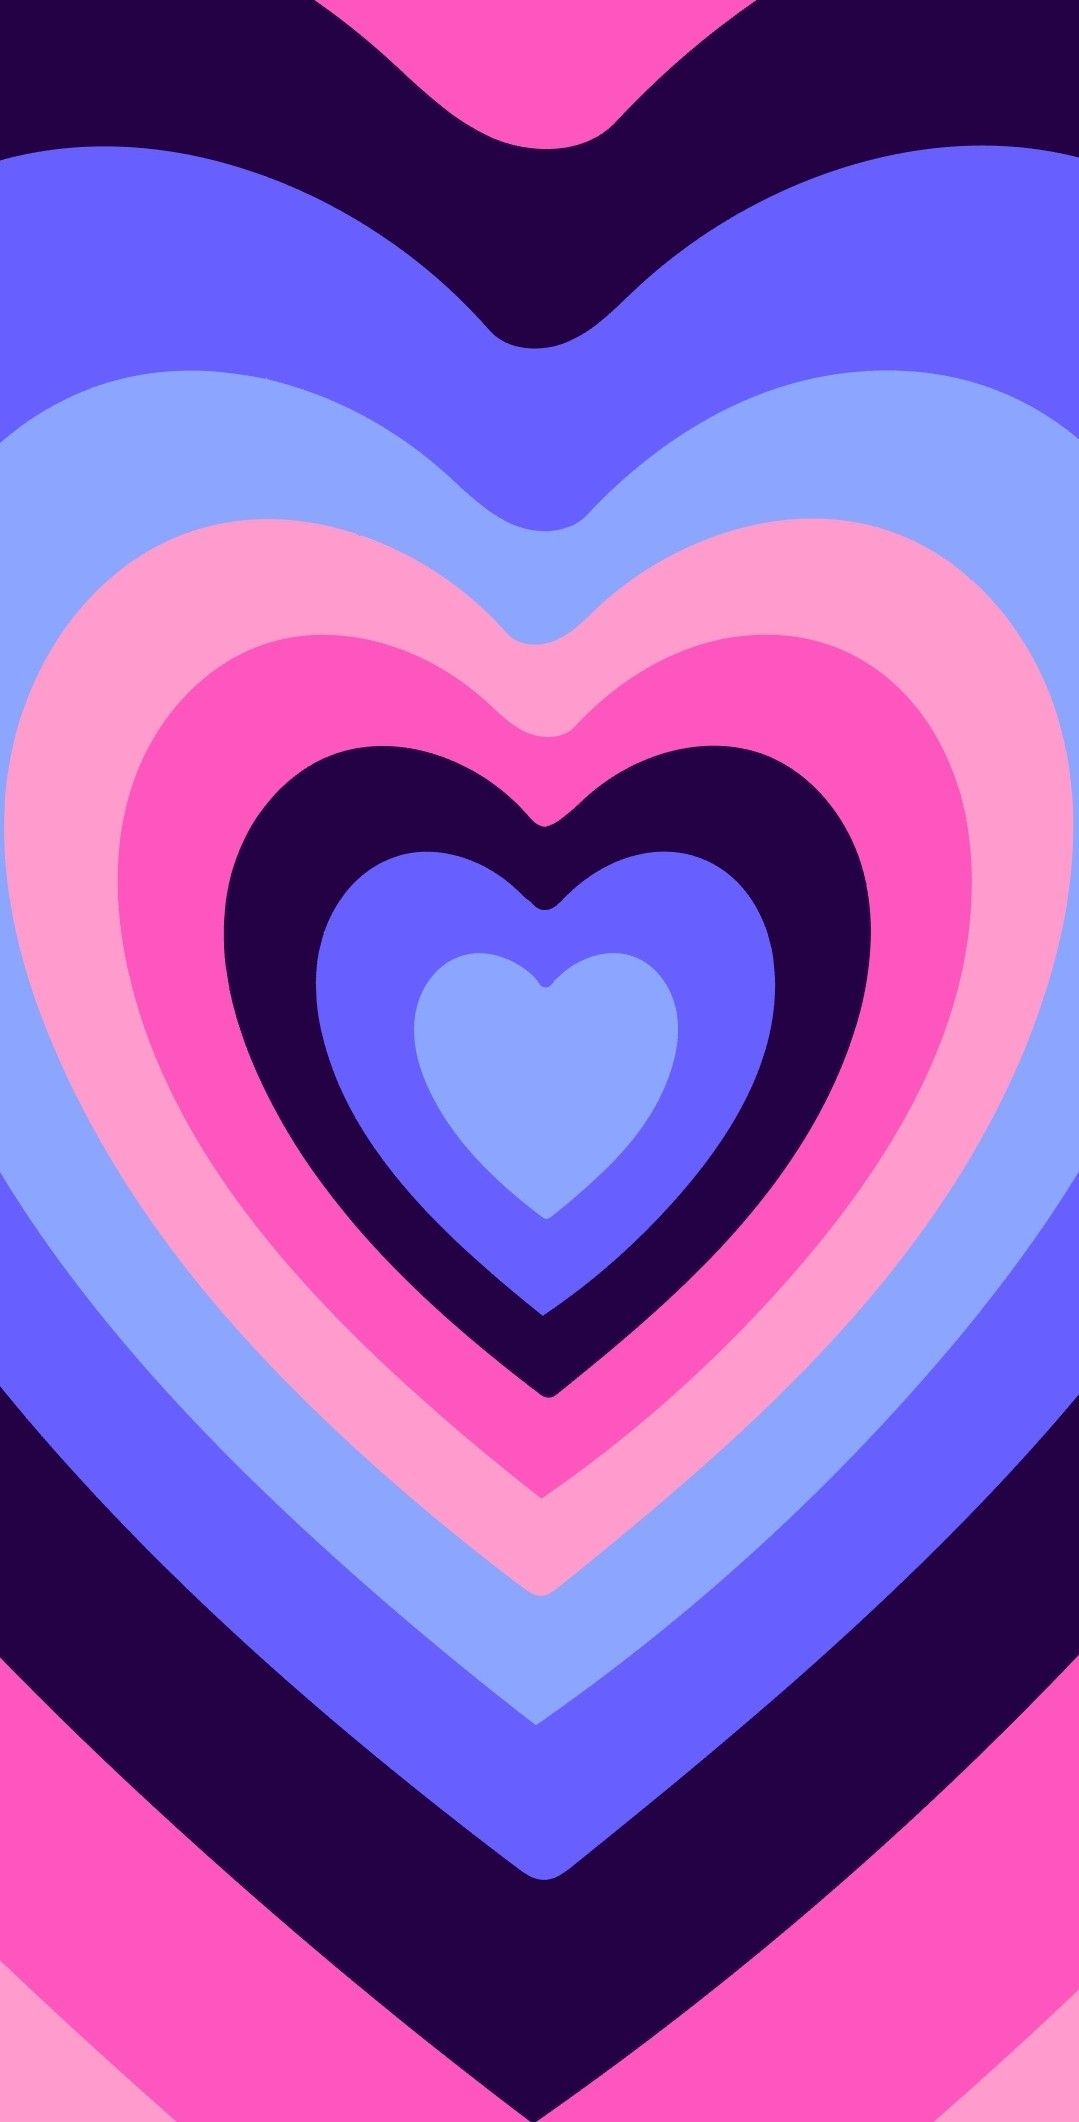 A pink and purple heart shaped pattern - 2000s, heart, Y2K, pansexual